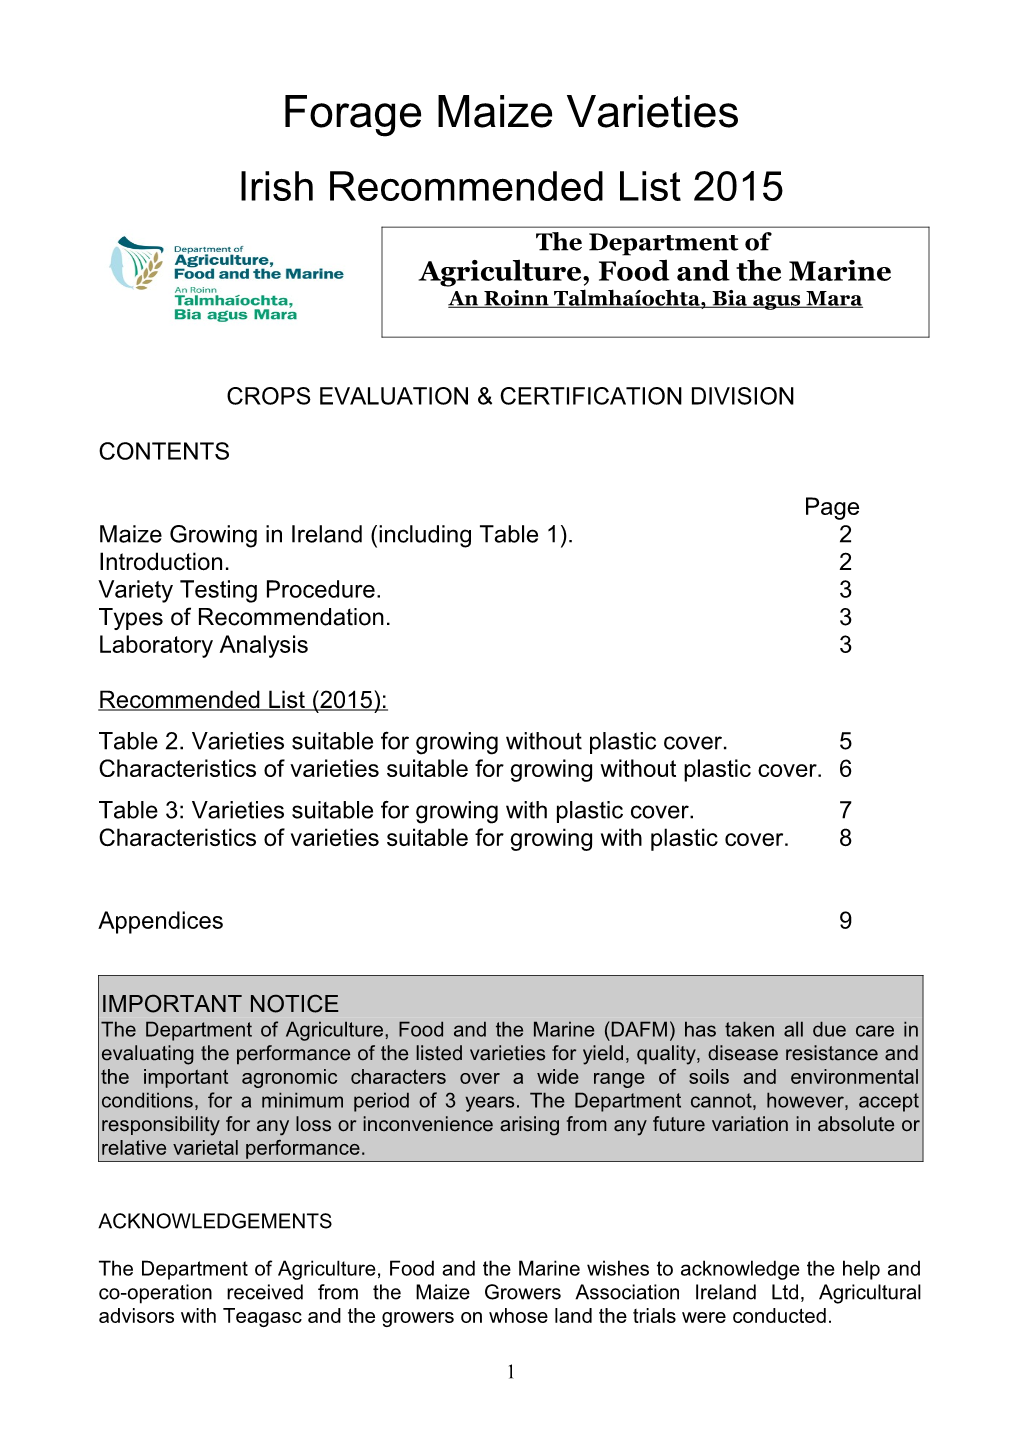 Forage Maize Varieties: Irish Recommended List 2015